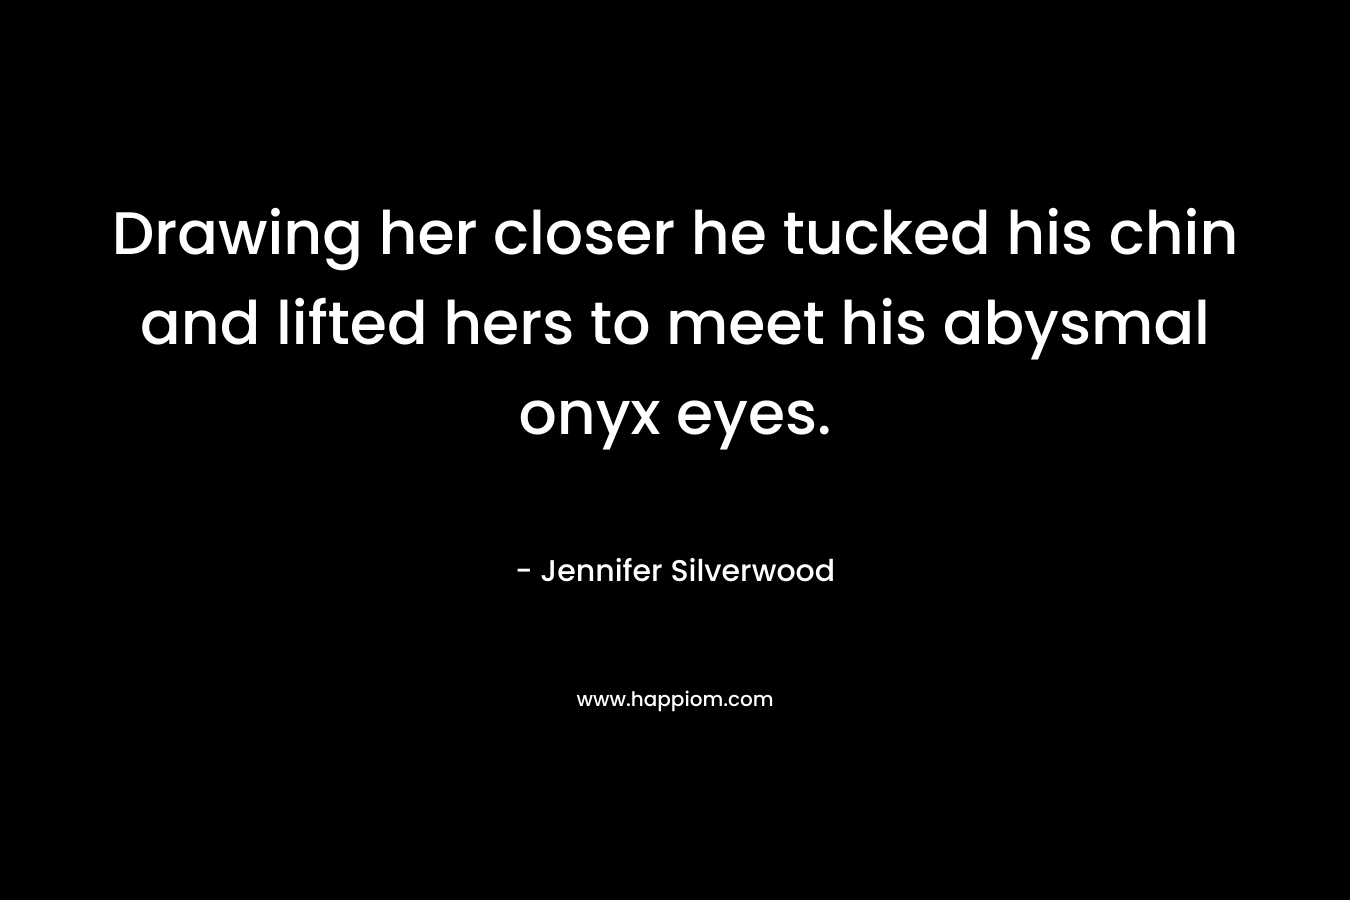 Drawing her closer he tucked his chin and lifted hers to meet his abysmal onyx eyes. – Jennifer Silverwood